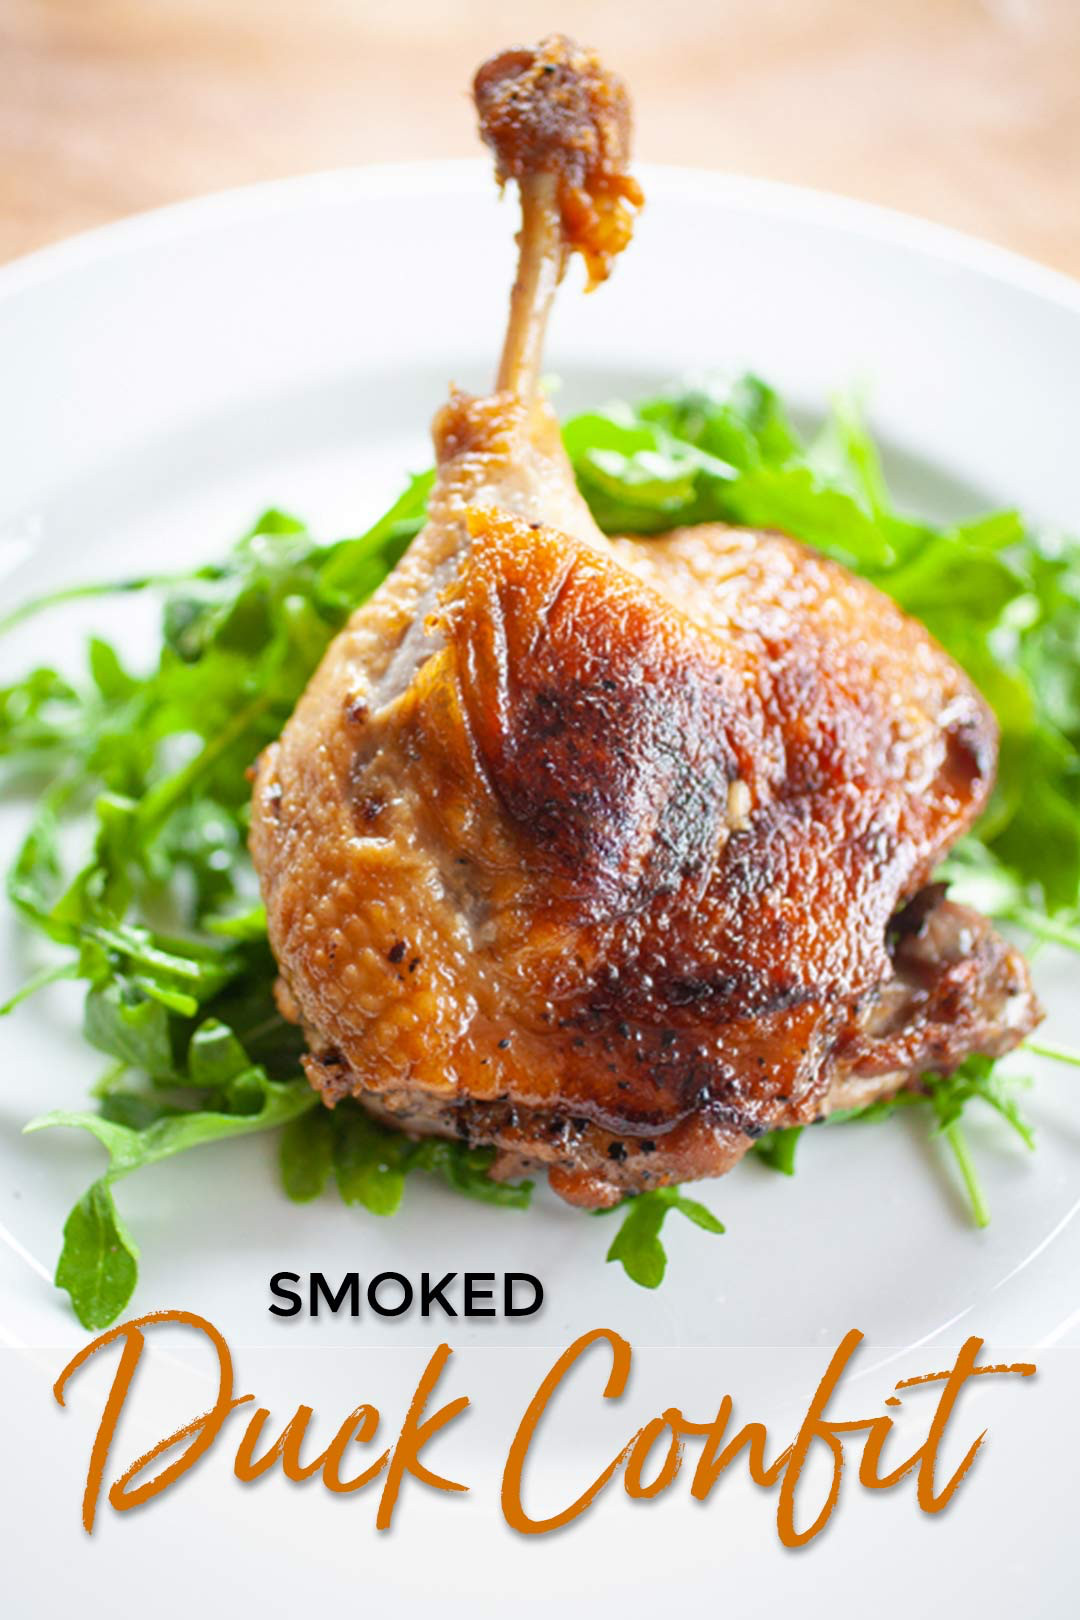 Smoked Duck Recipes
 Smoked Duck Confit